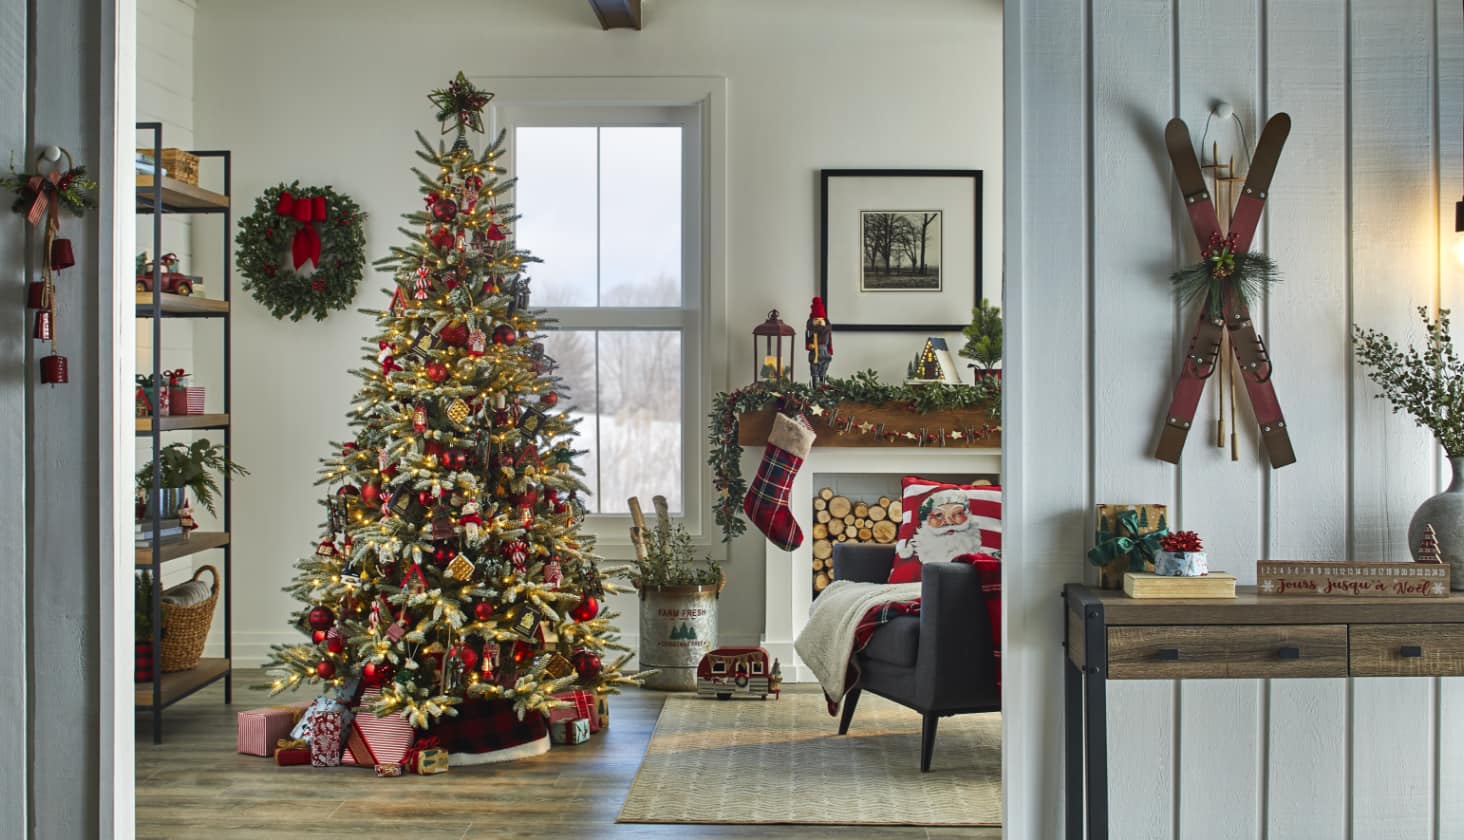 A living room decorated with a Christmas tree and a variety of decorations.